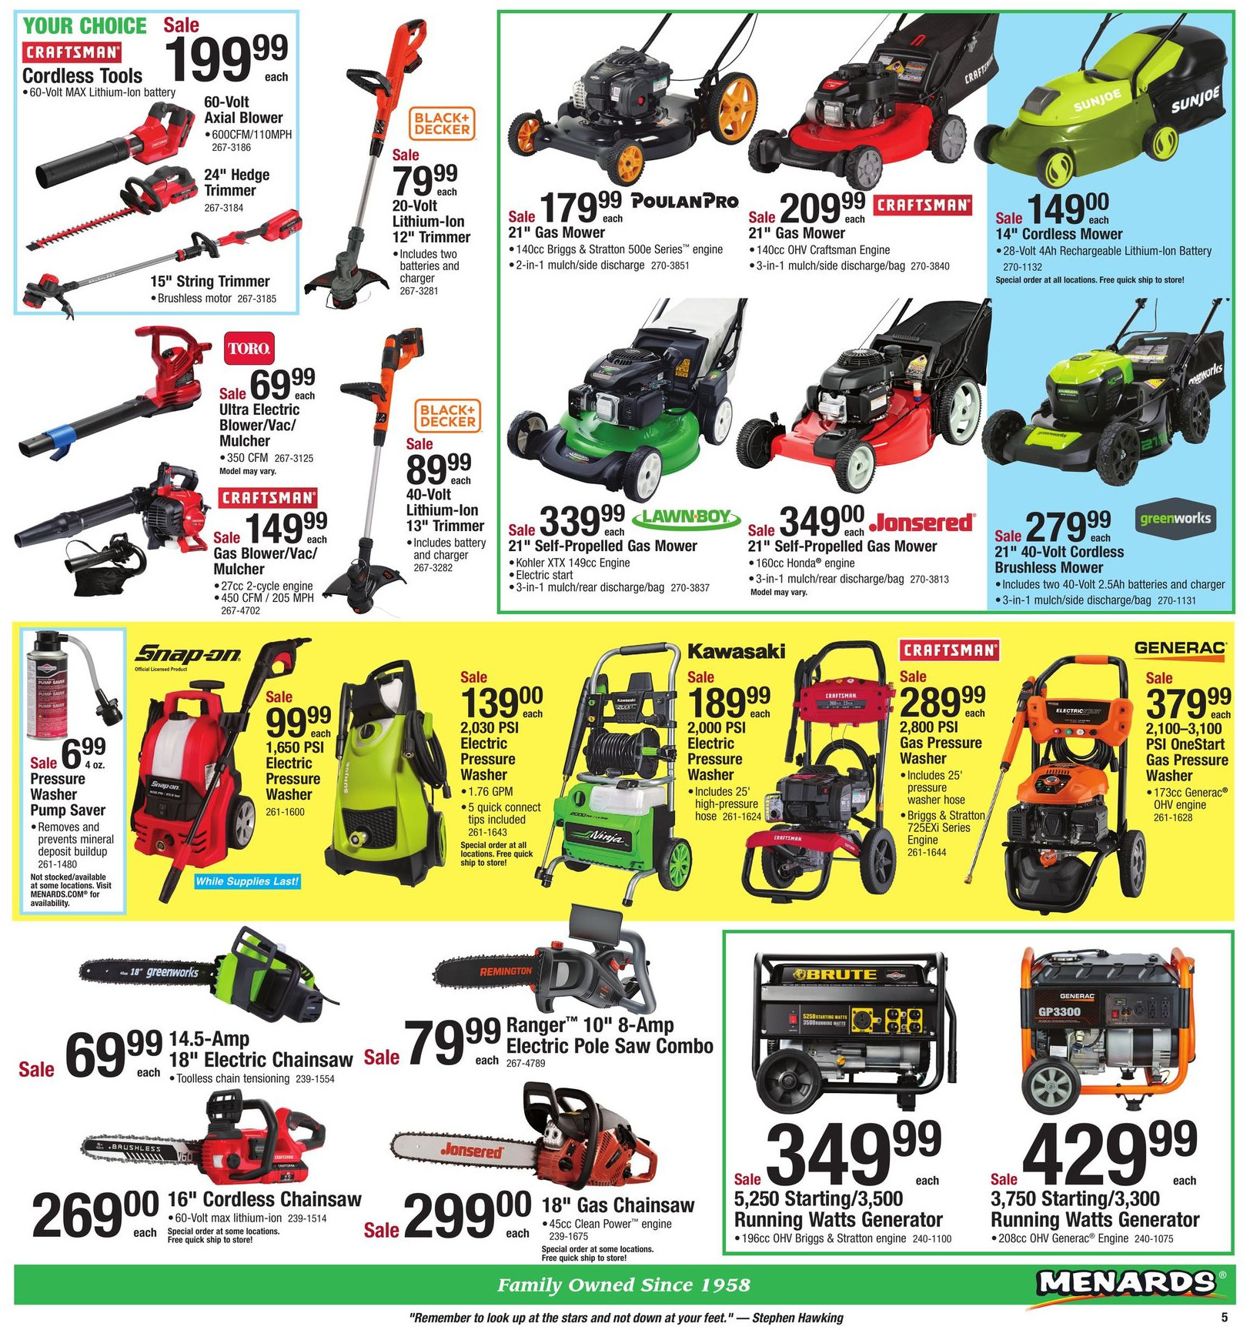 Menards Current weekly ad 04/21 - 05/05/2019 [7] - www.bagsaleusa.com/product-category/twist-bag/